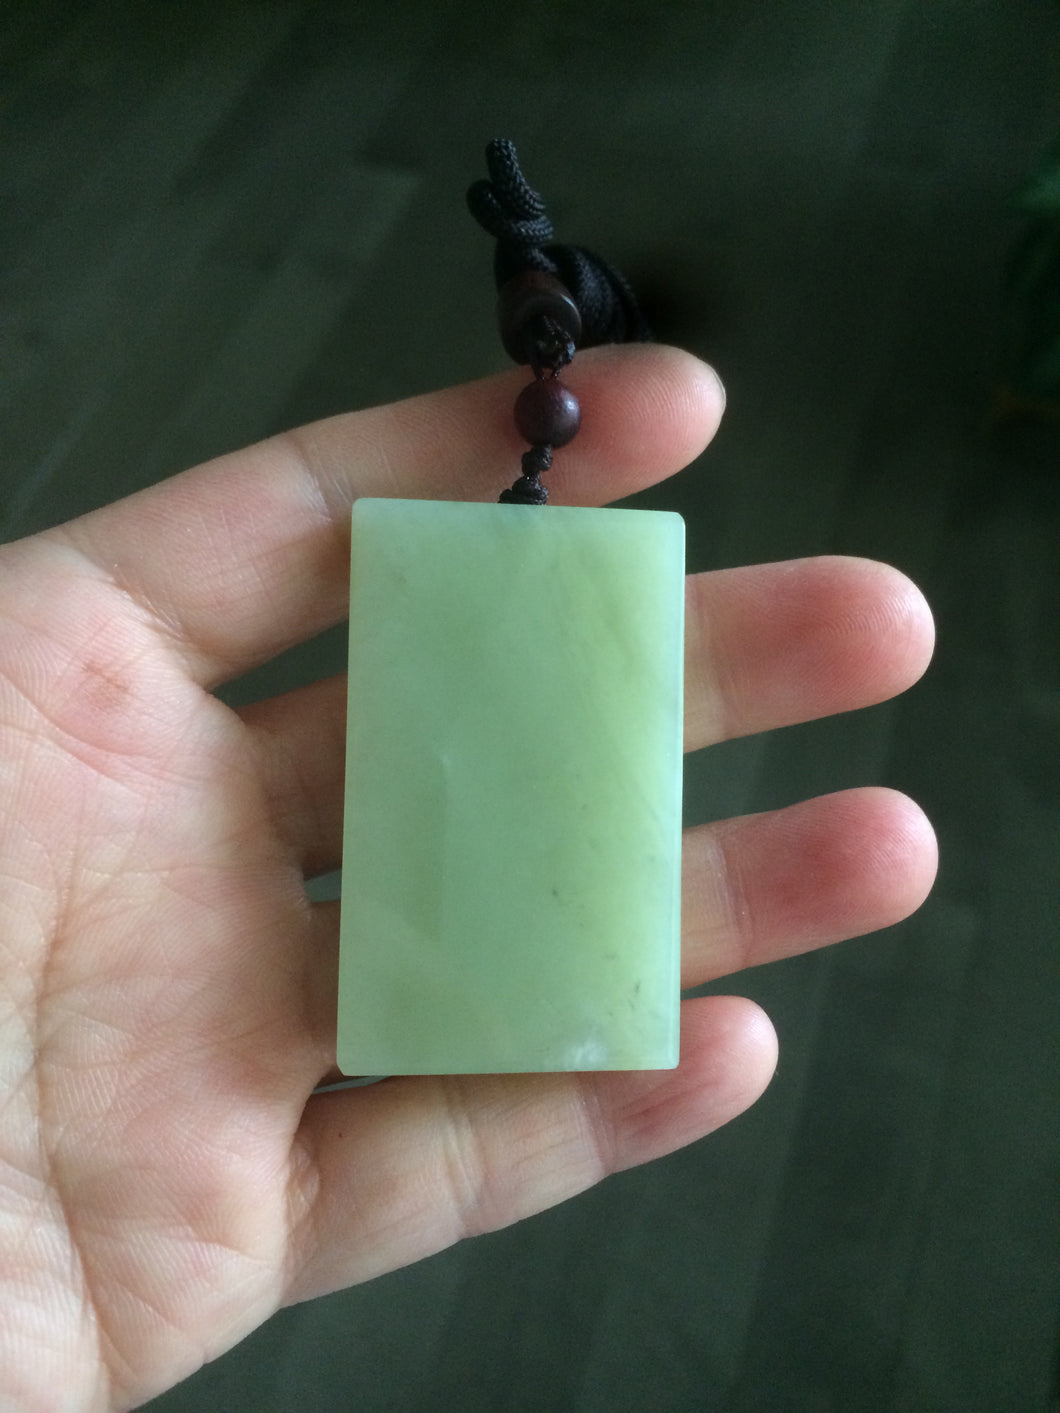 100% natural light yellow/green oily nephrite Hetian jade safe and sound pendant Z10